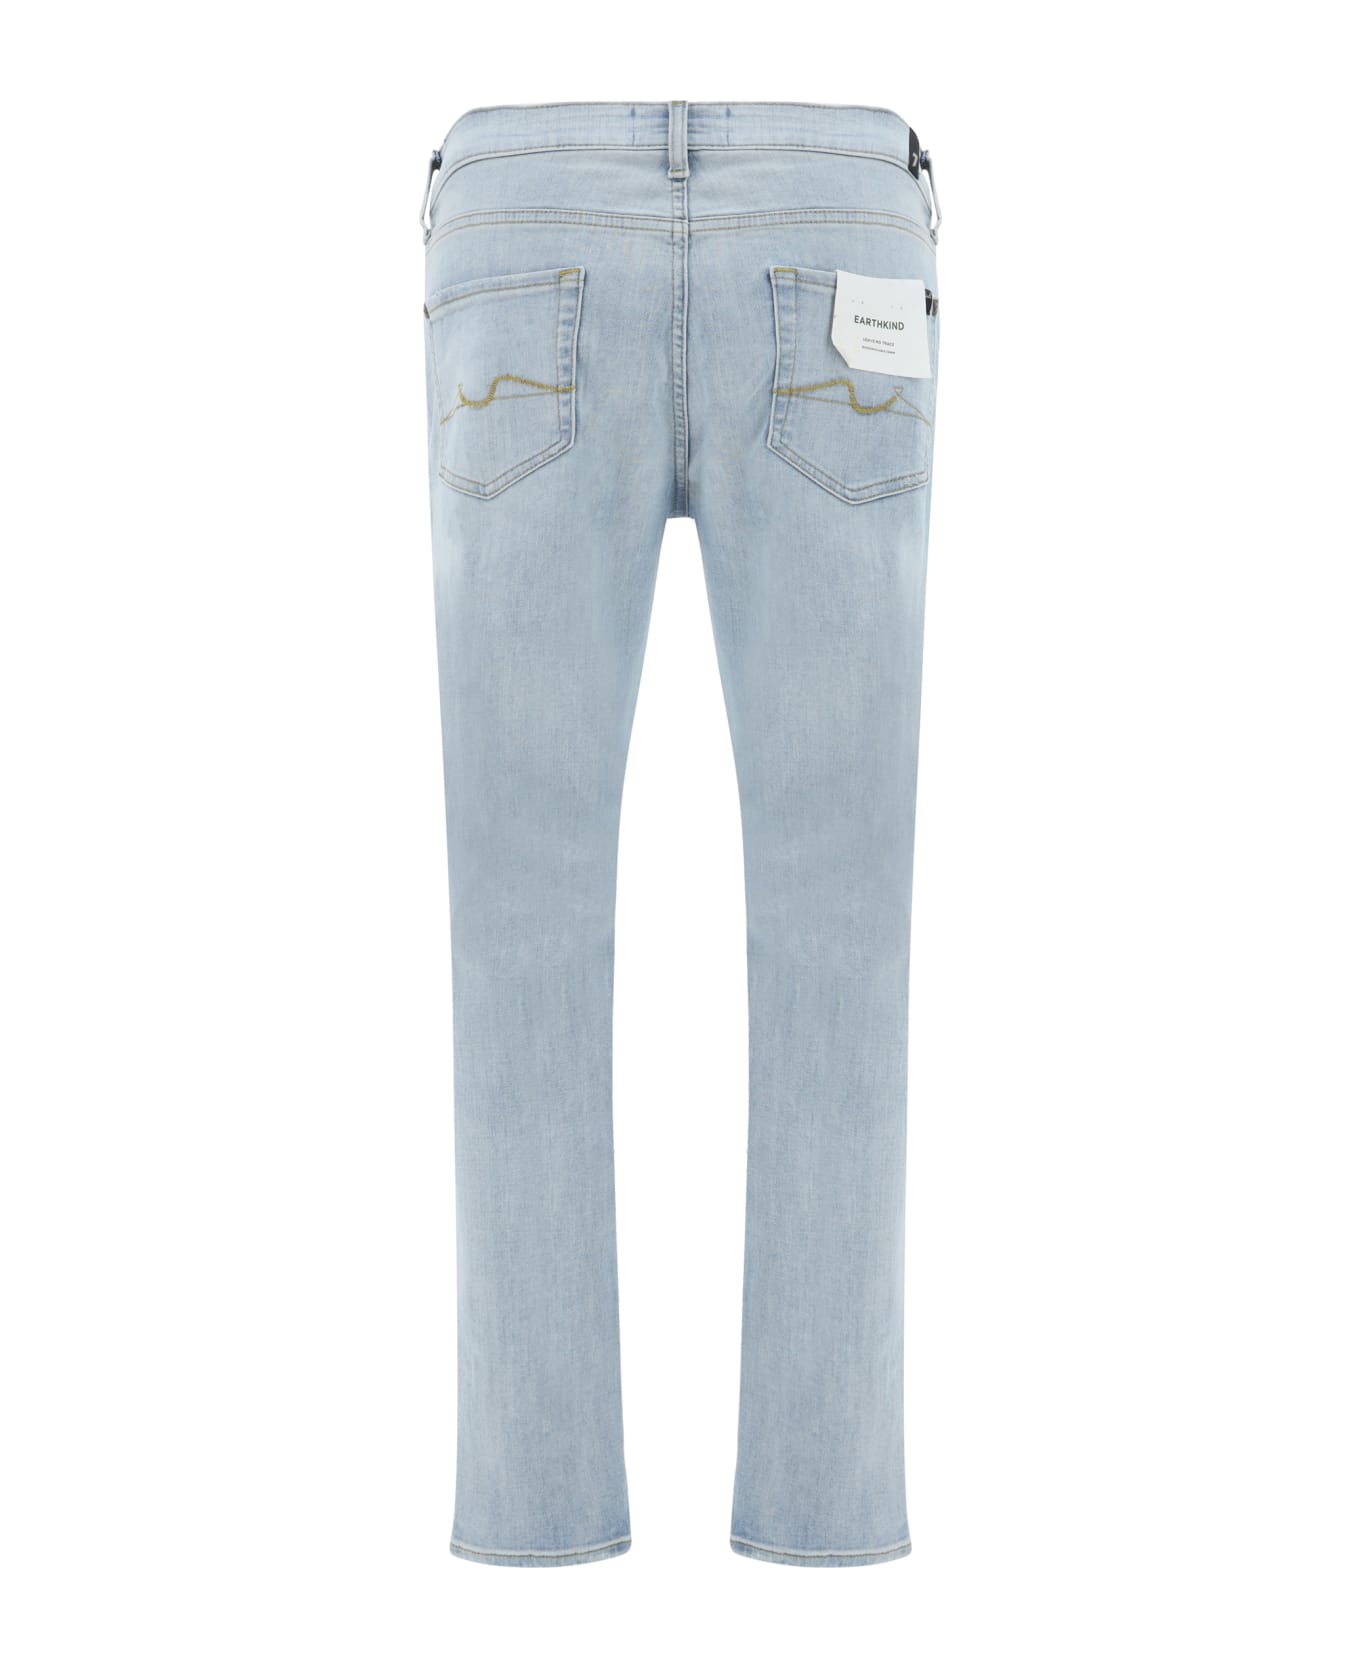 7 For All Mankind Jeans - Light Blue